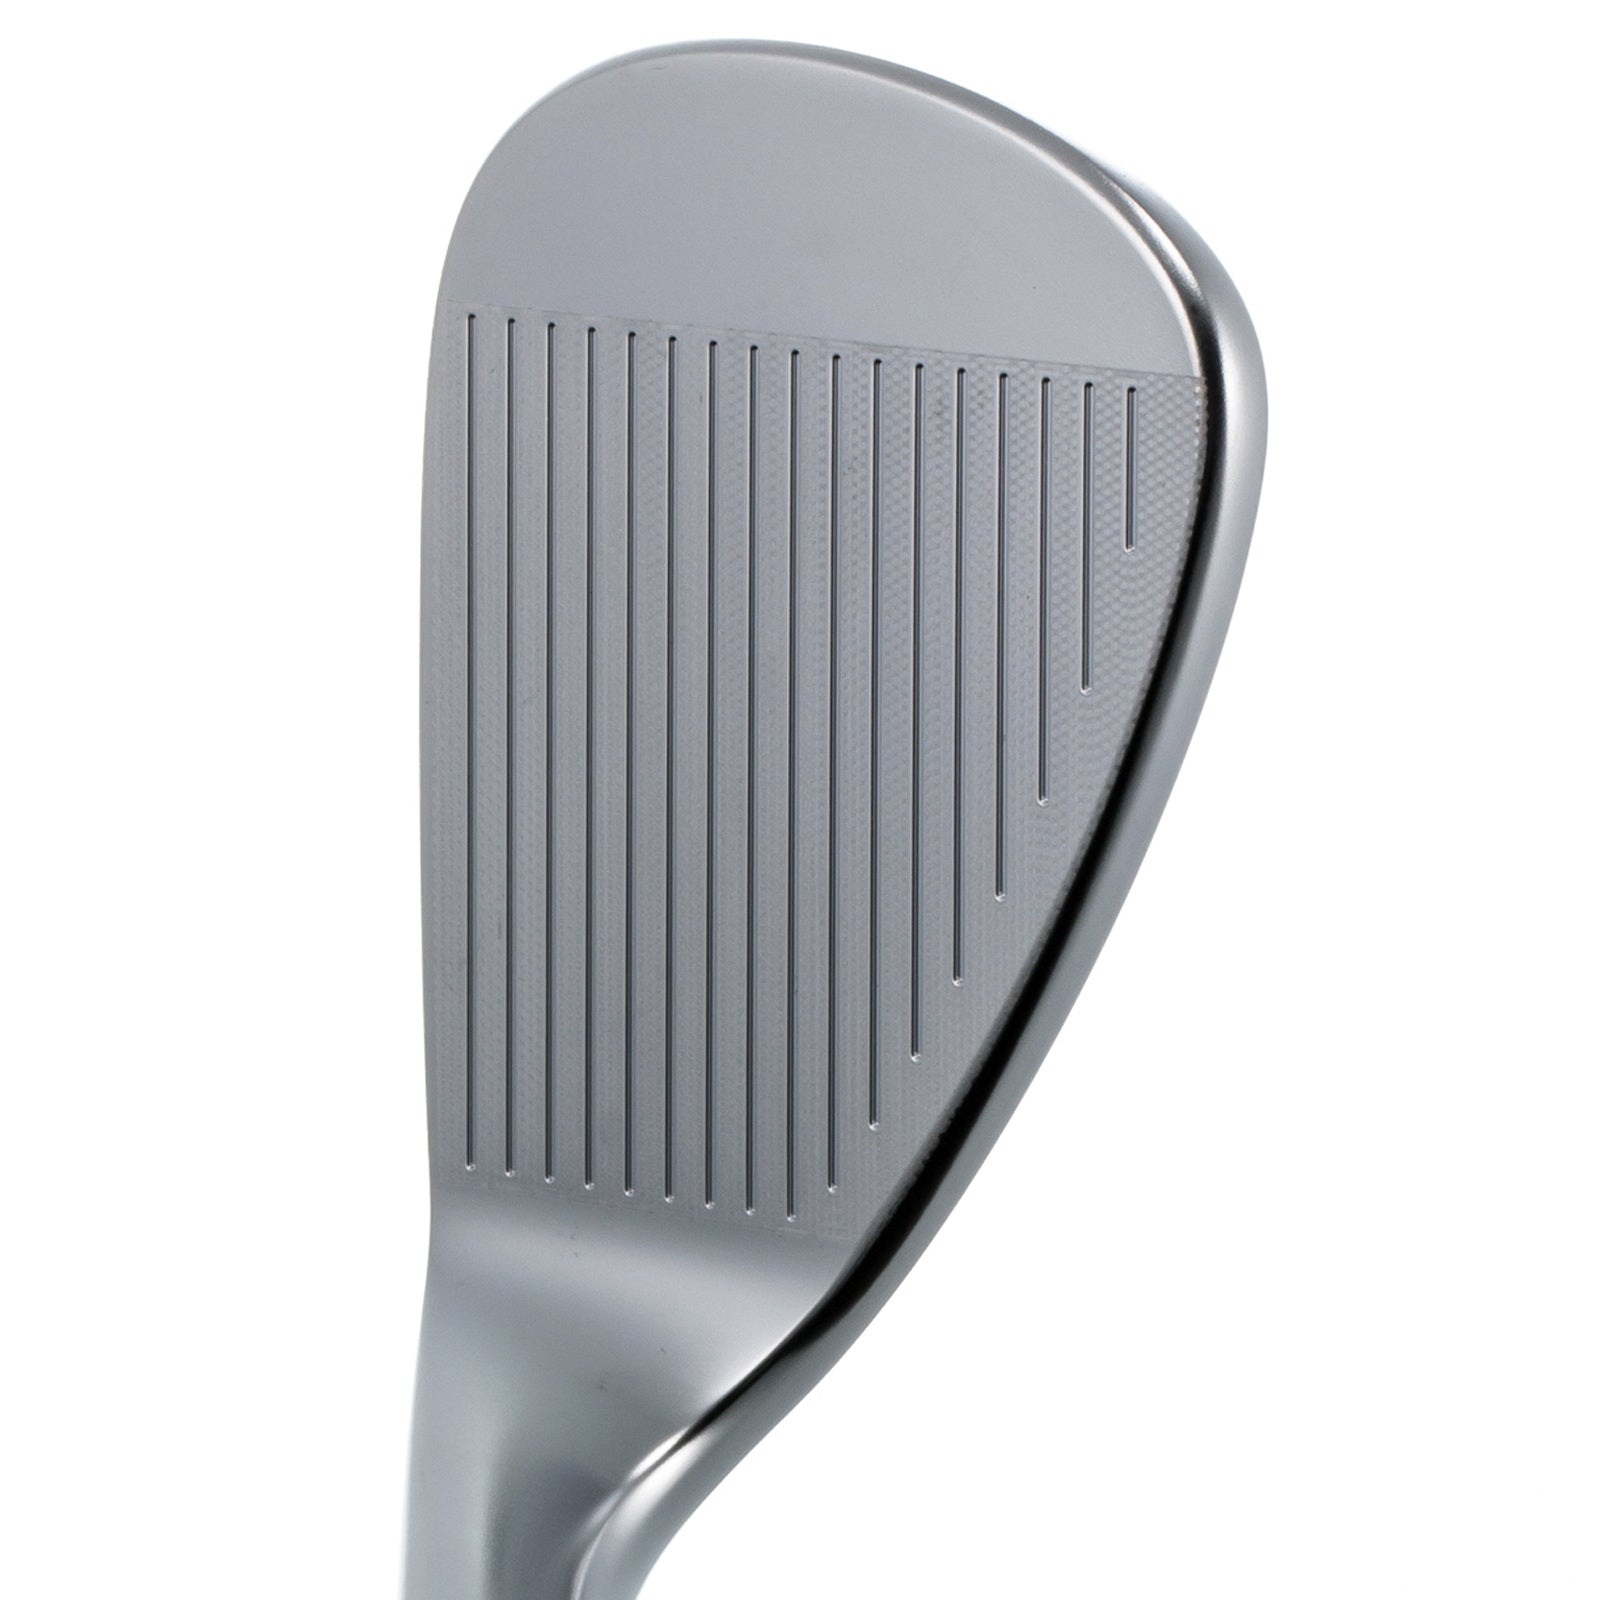 PROTOCONCEPT Golf, Protoconcept Wedge, Golf Wedge, Forged wedge, golf wedge